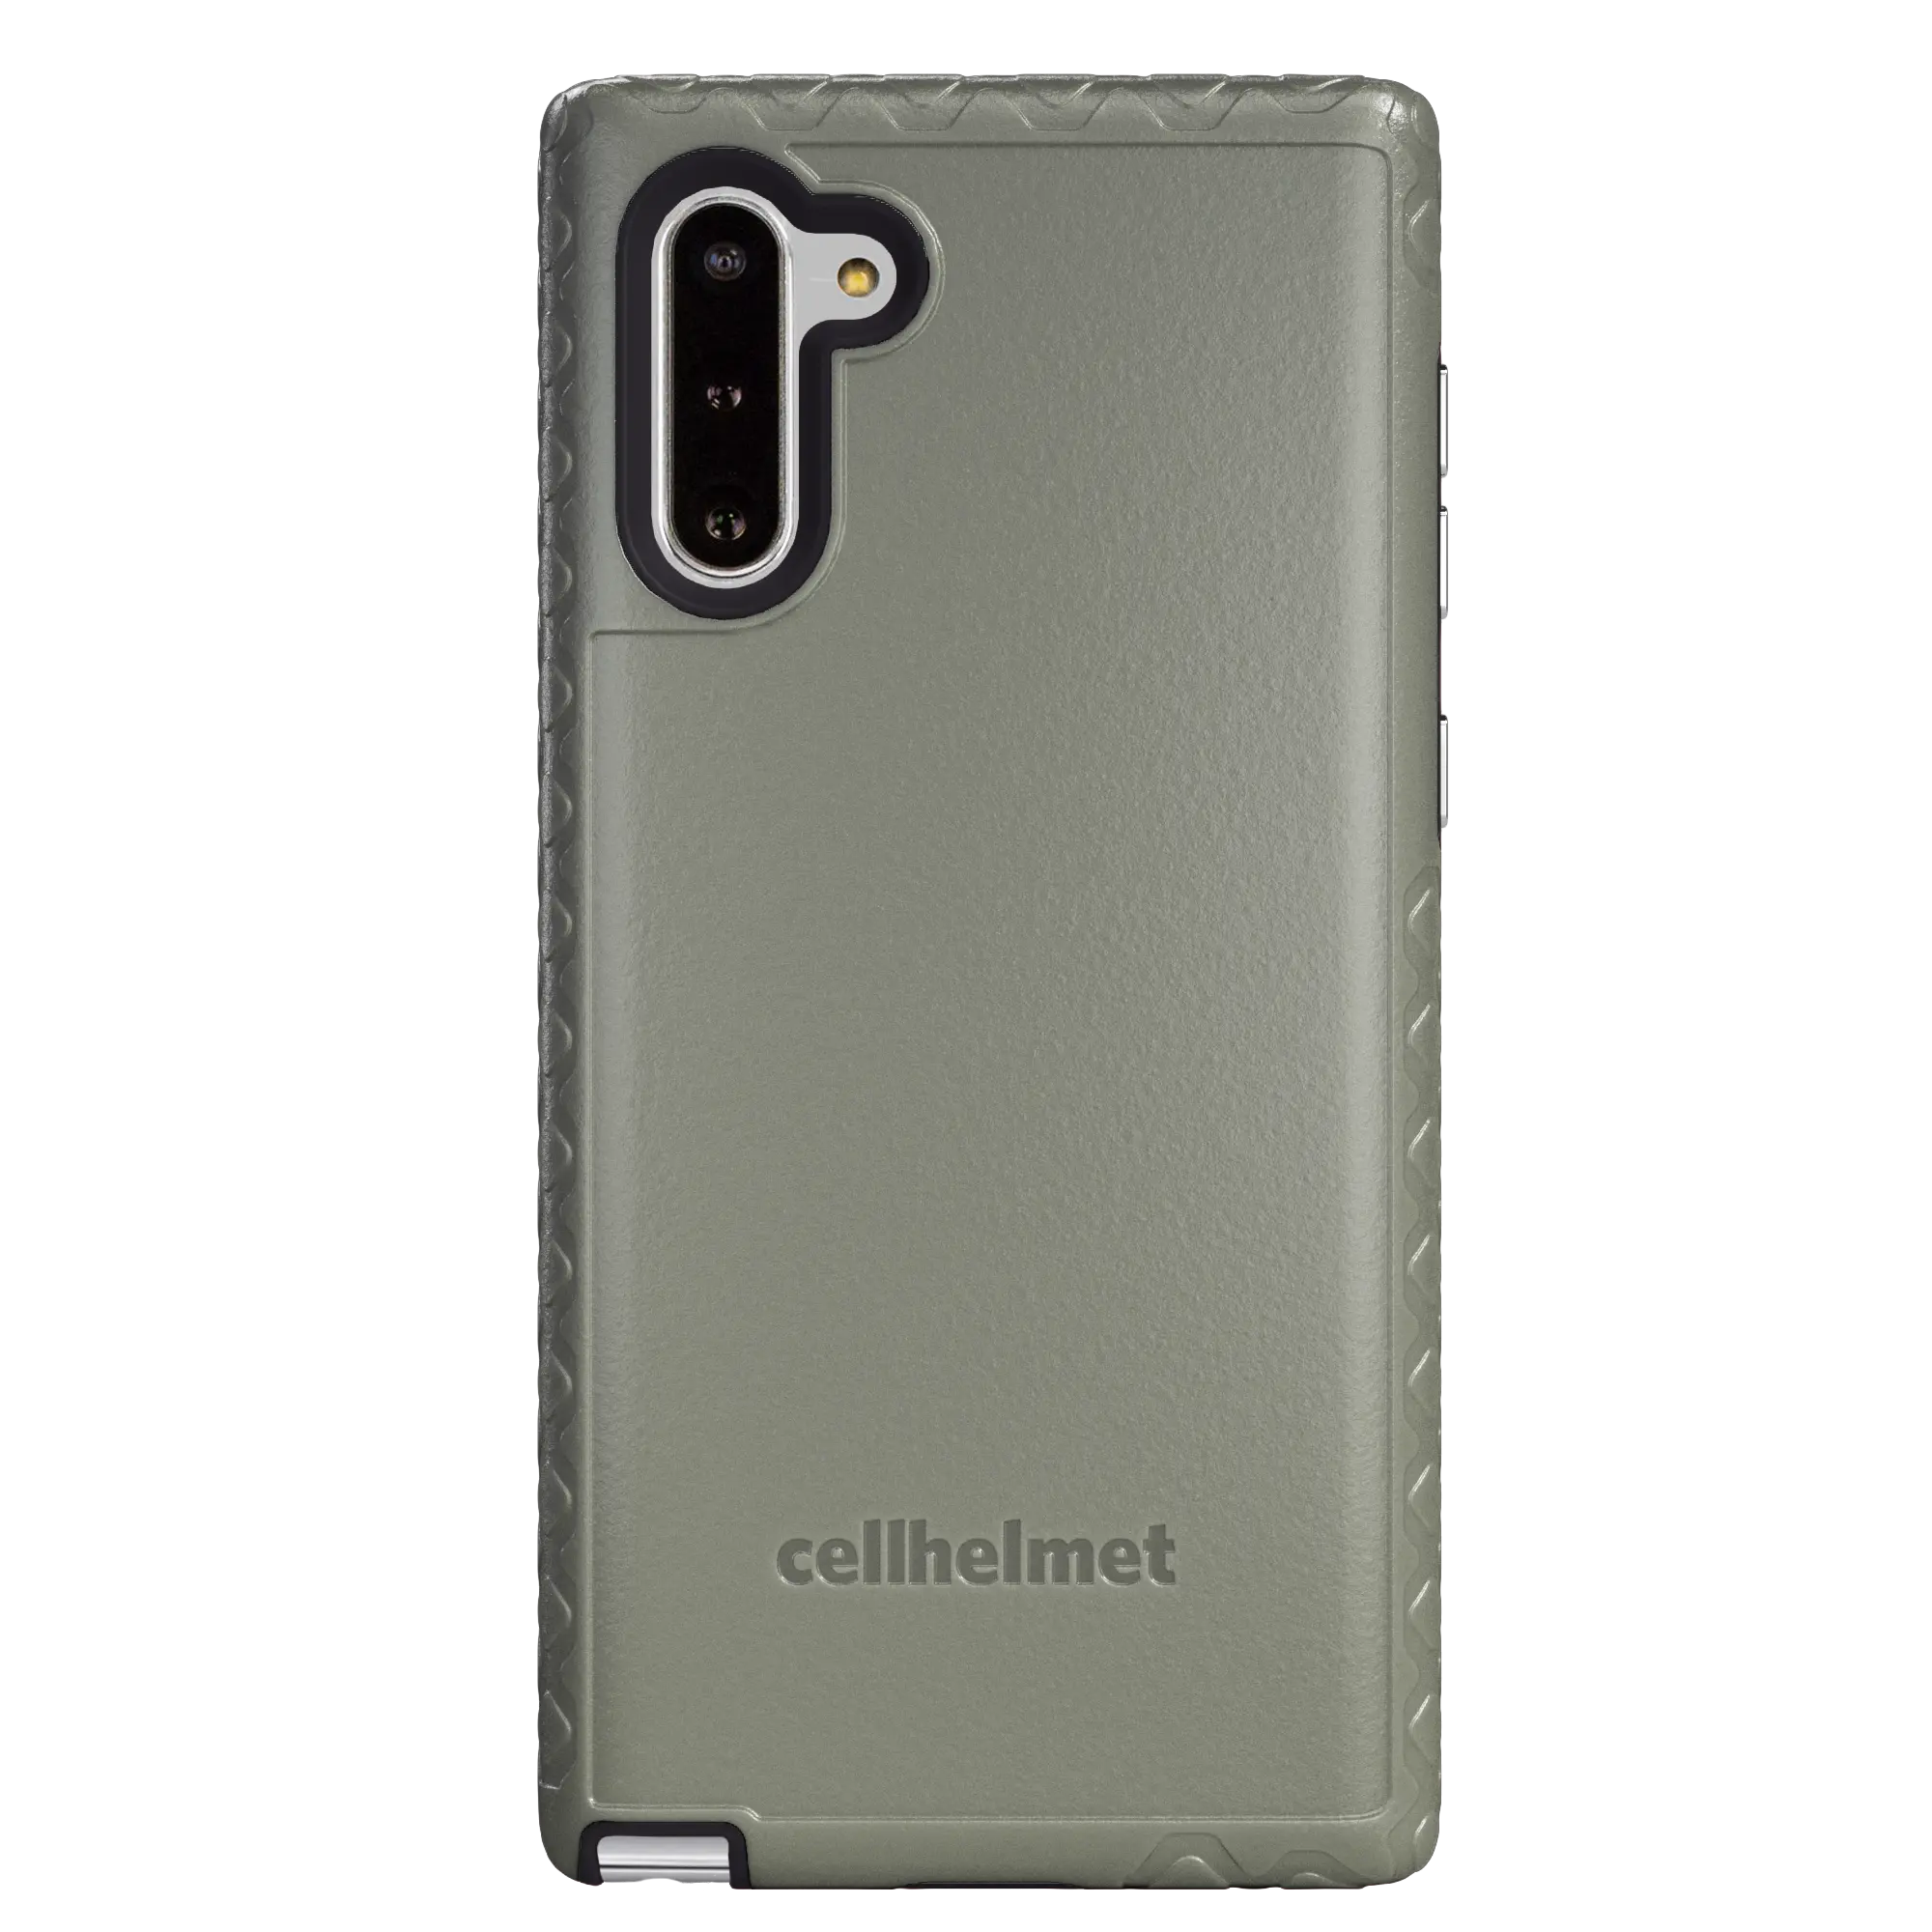 Green cellhelmet Customizable Case for Galaxy Note 10